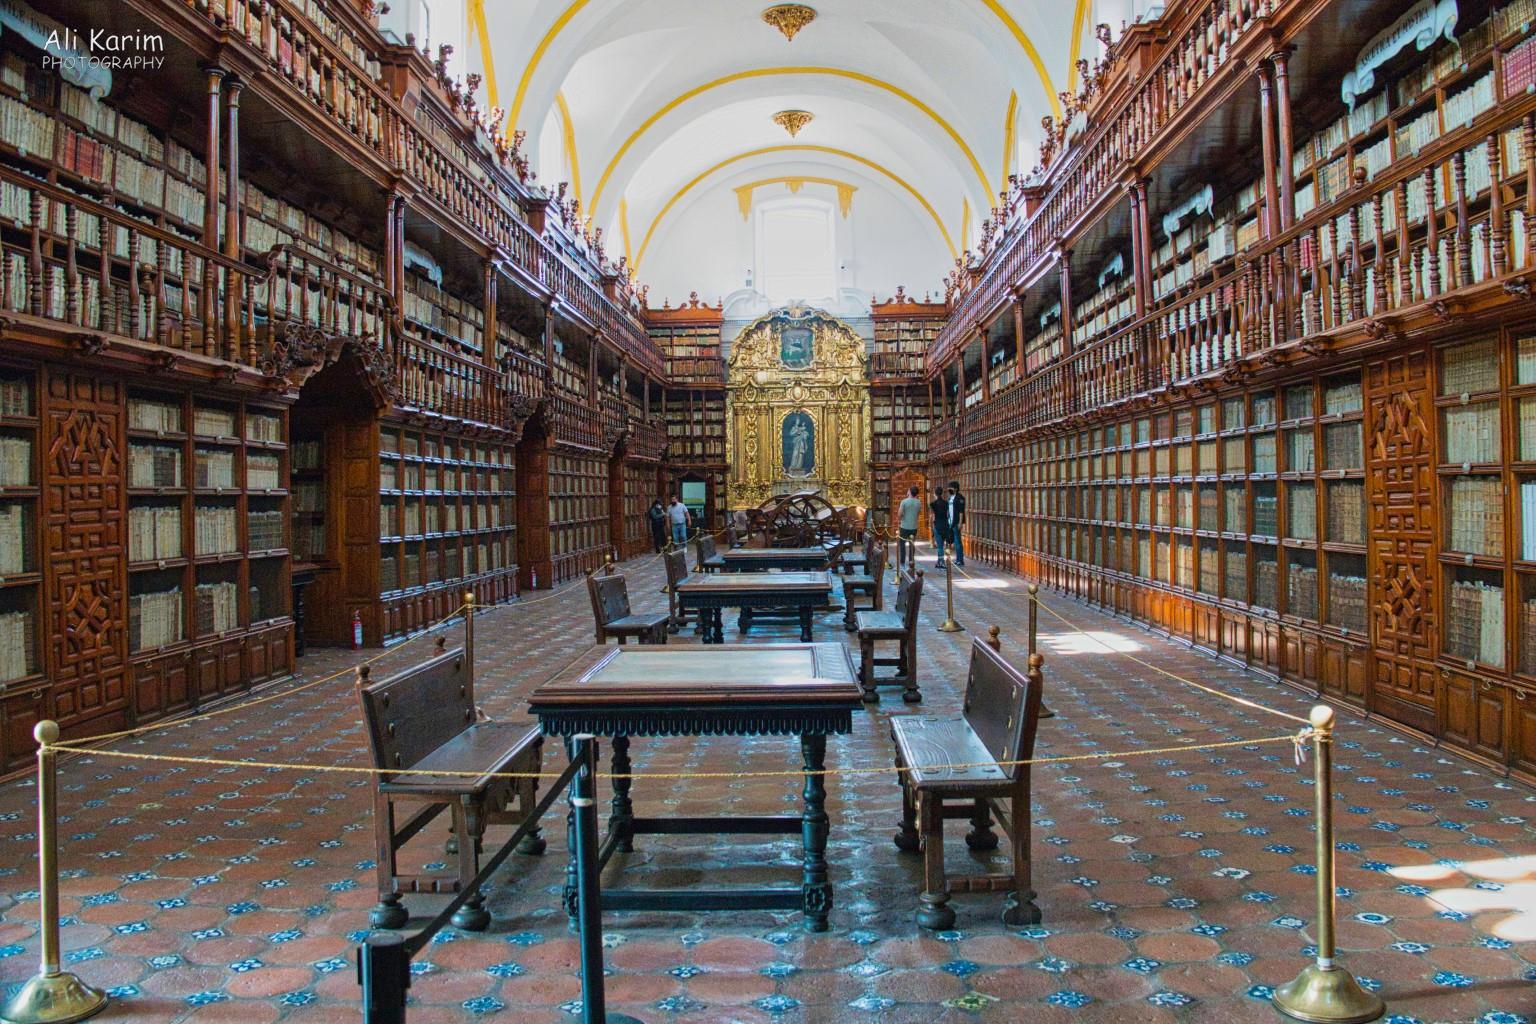 Puebla, Mexico Dec 2020, The Biblioteca Palafoxiana, established in 1646, was the first library in the Americas and is the only one to survive to the present day.